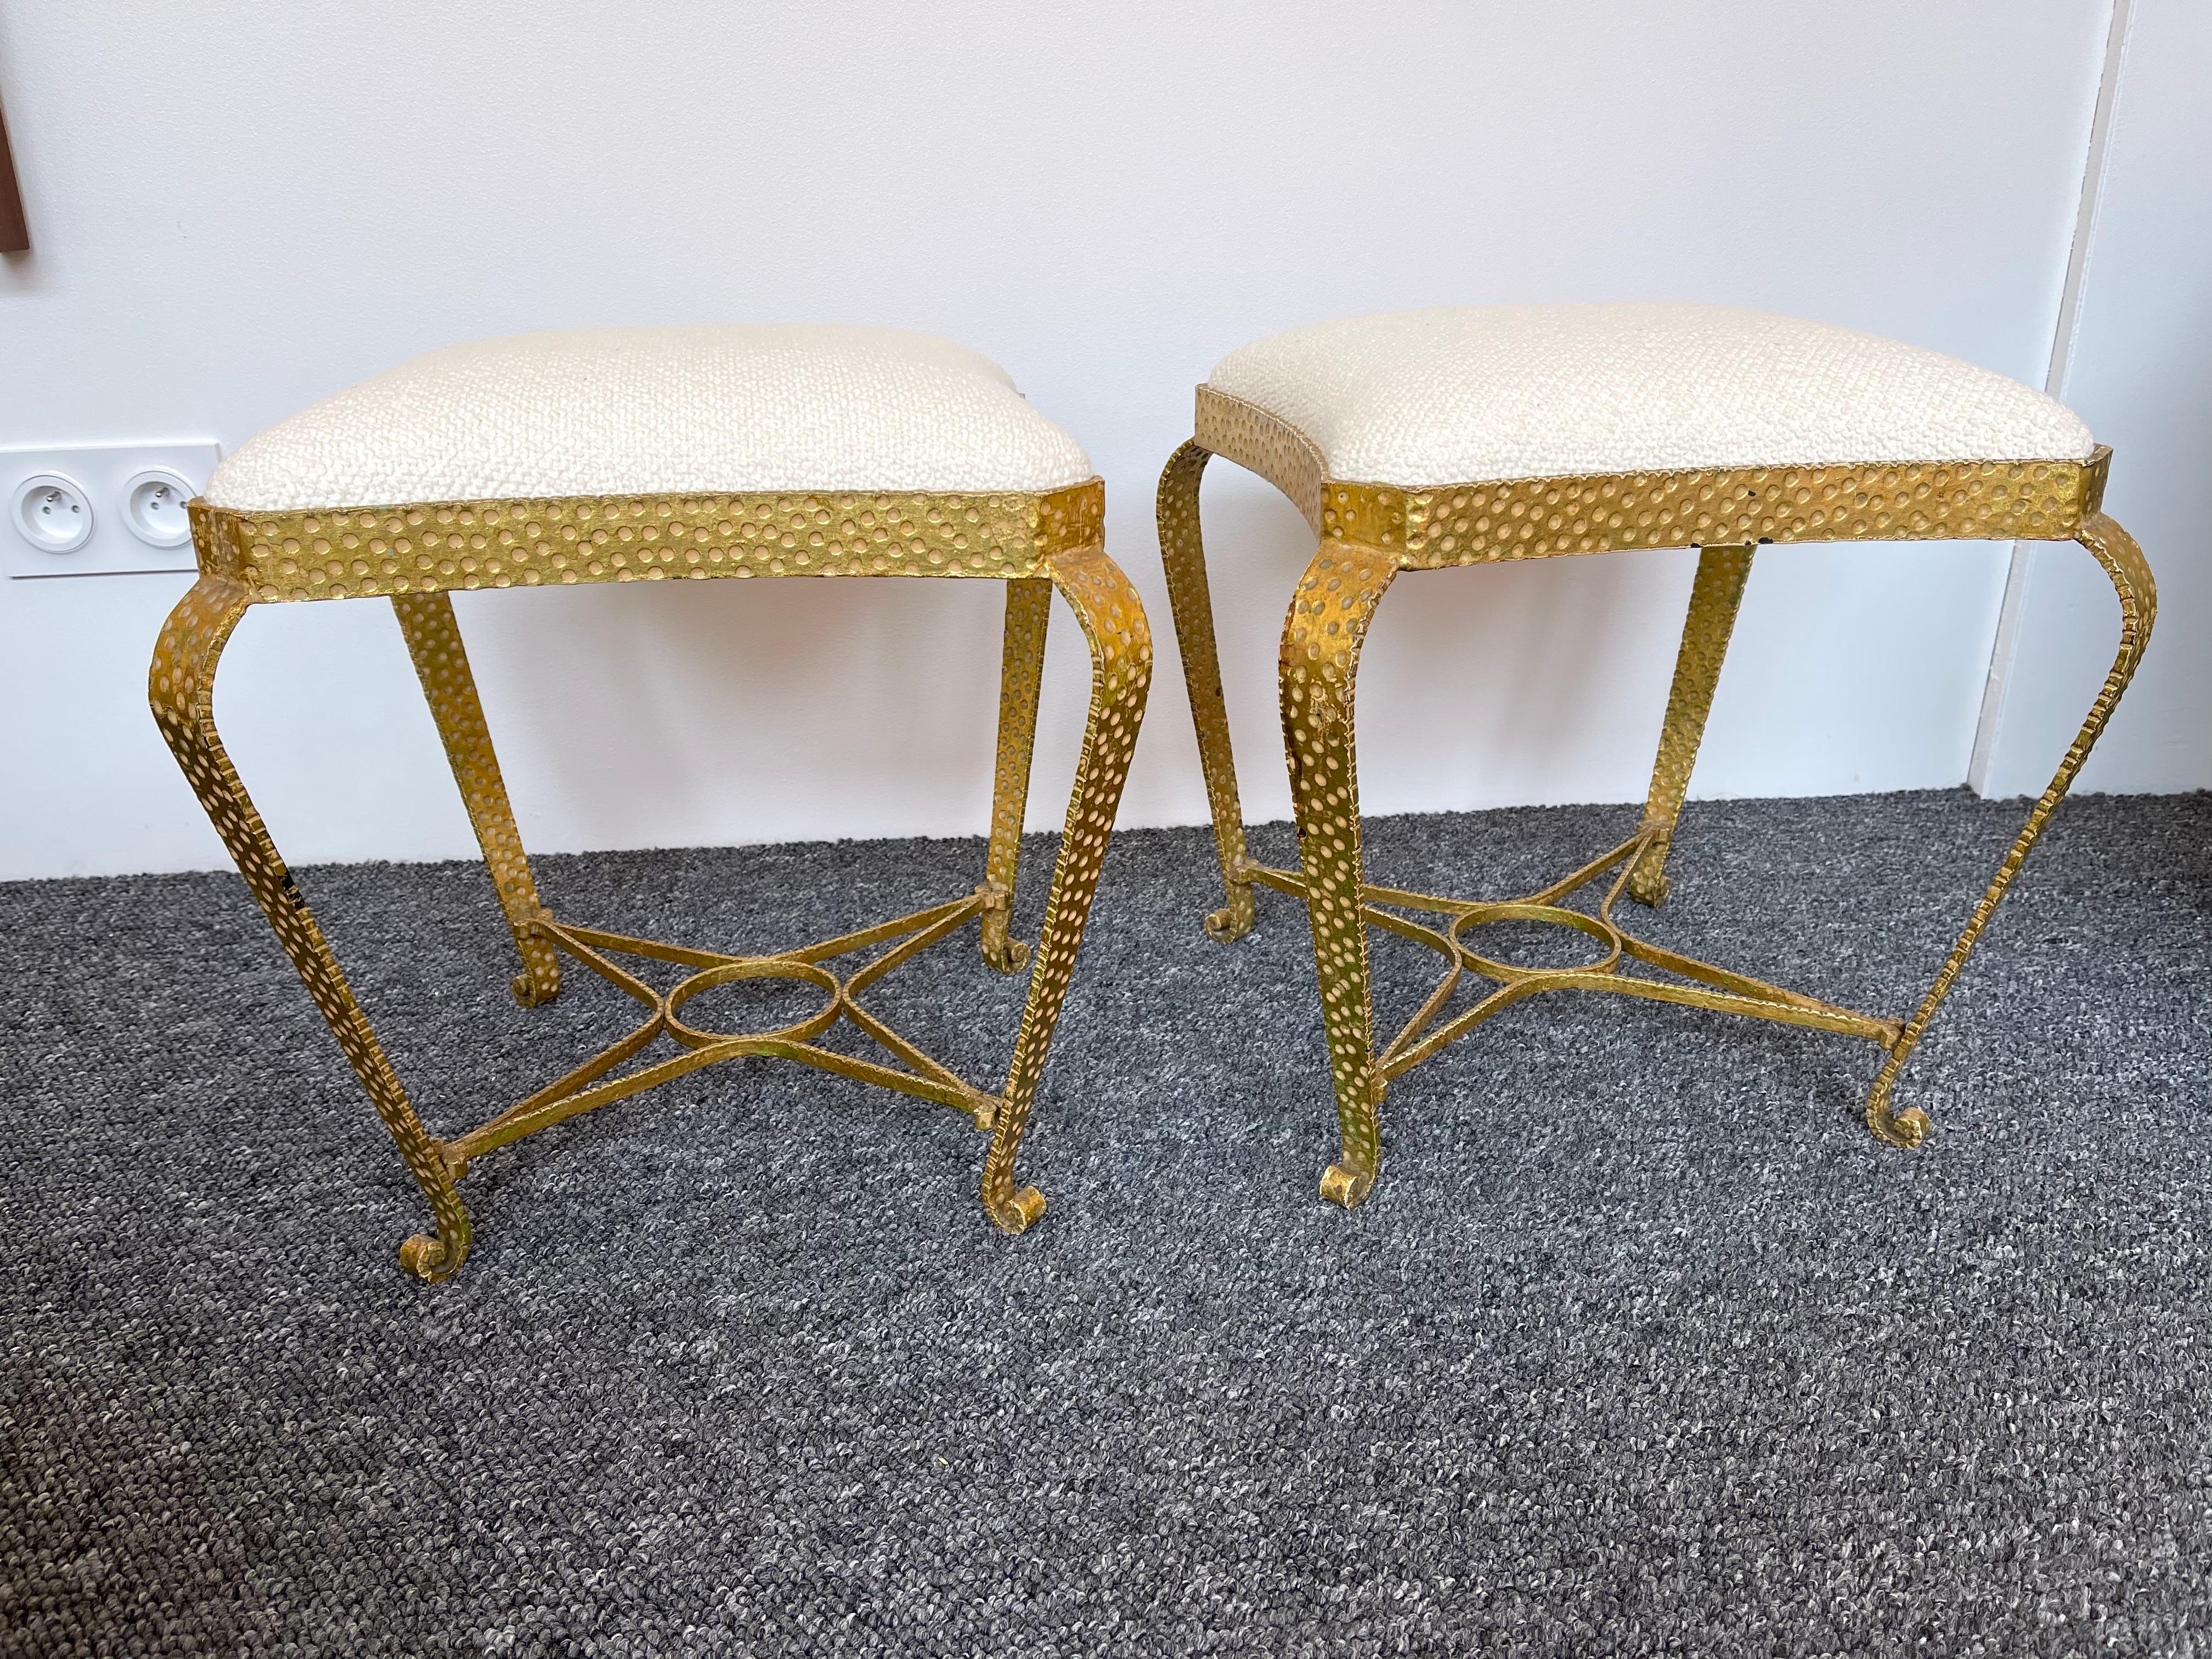 Pair of stools, poufs or ottomans by Pier Luigi Colli. Hammered wrought iron and gold leaf. Fully upholstered in bouclé fabric. A bench are available on my storefront. Famous design like Maison Jansen, Baguès, Gilbert Poillerat, Raymond Subes,